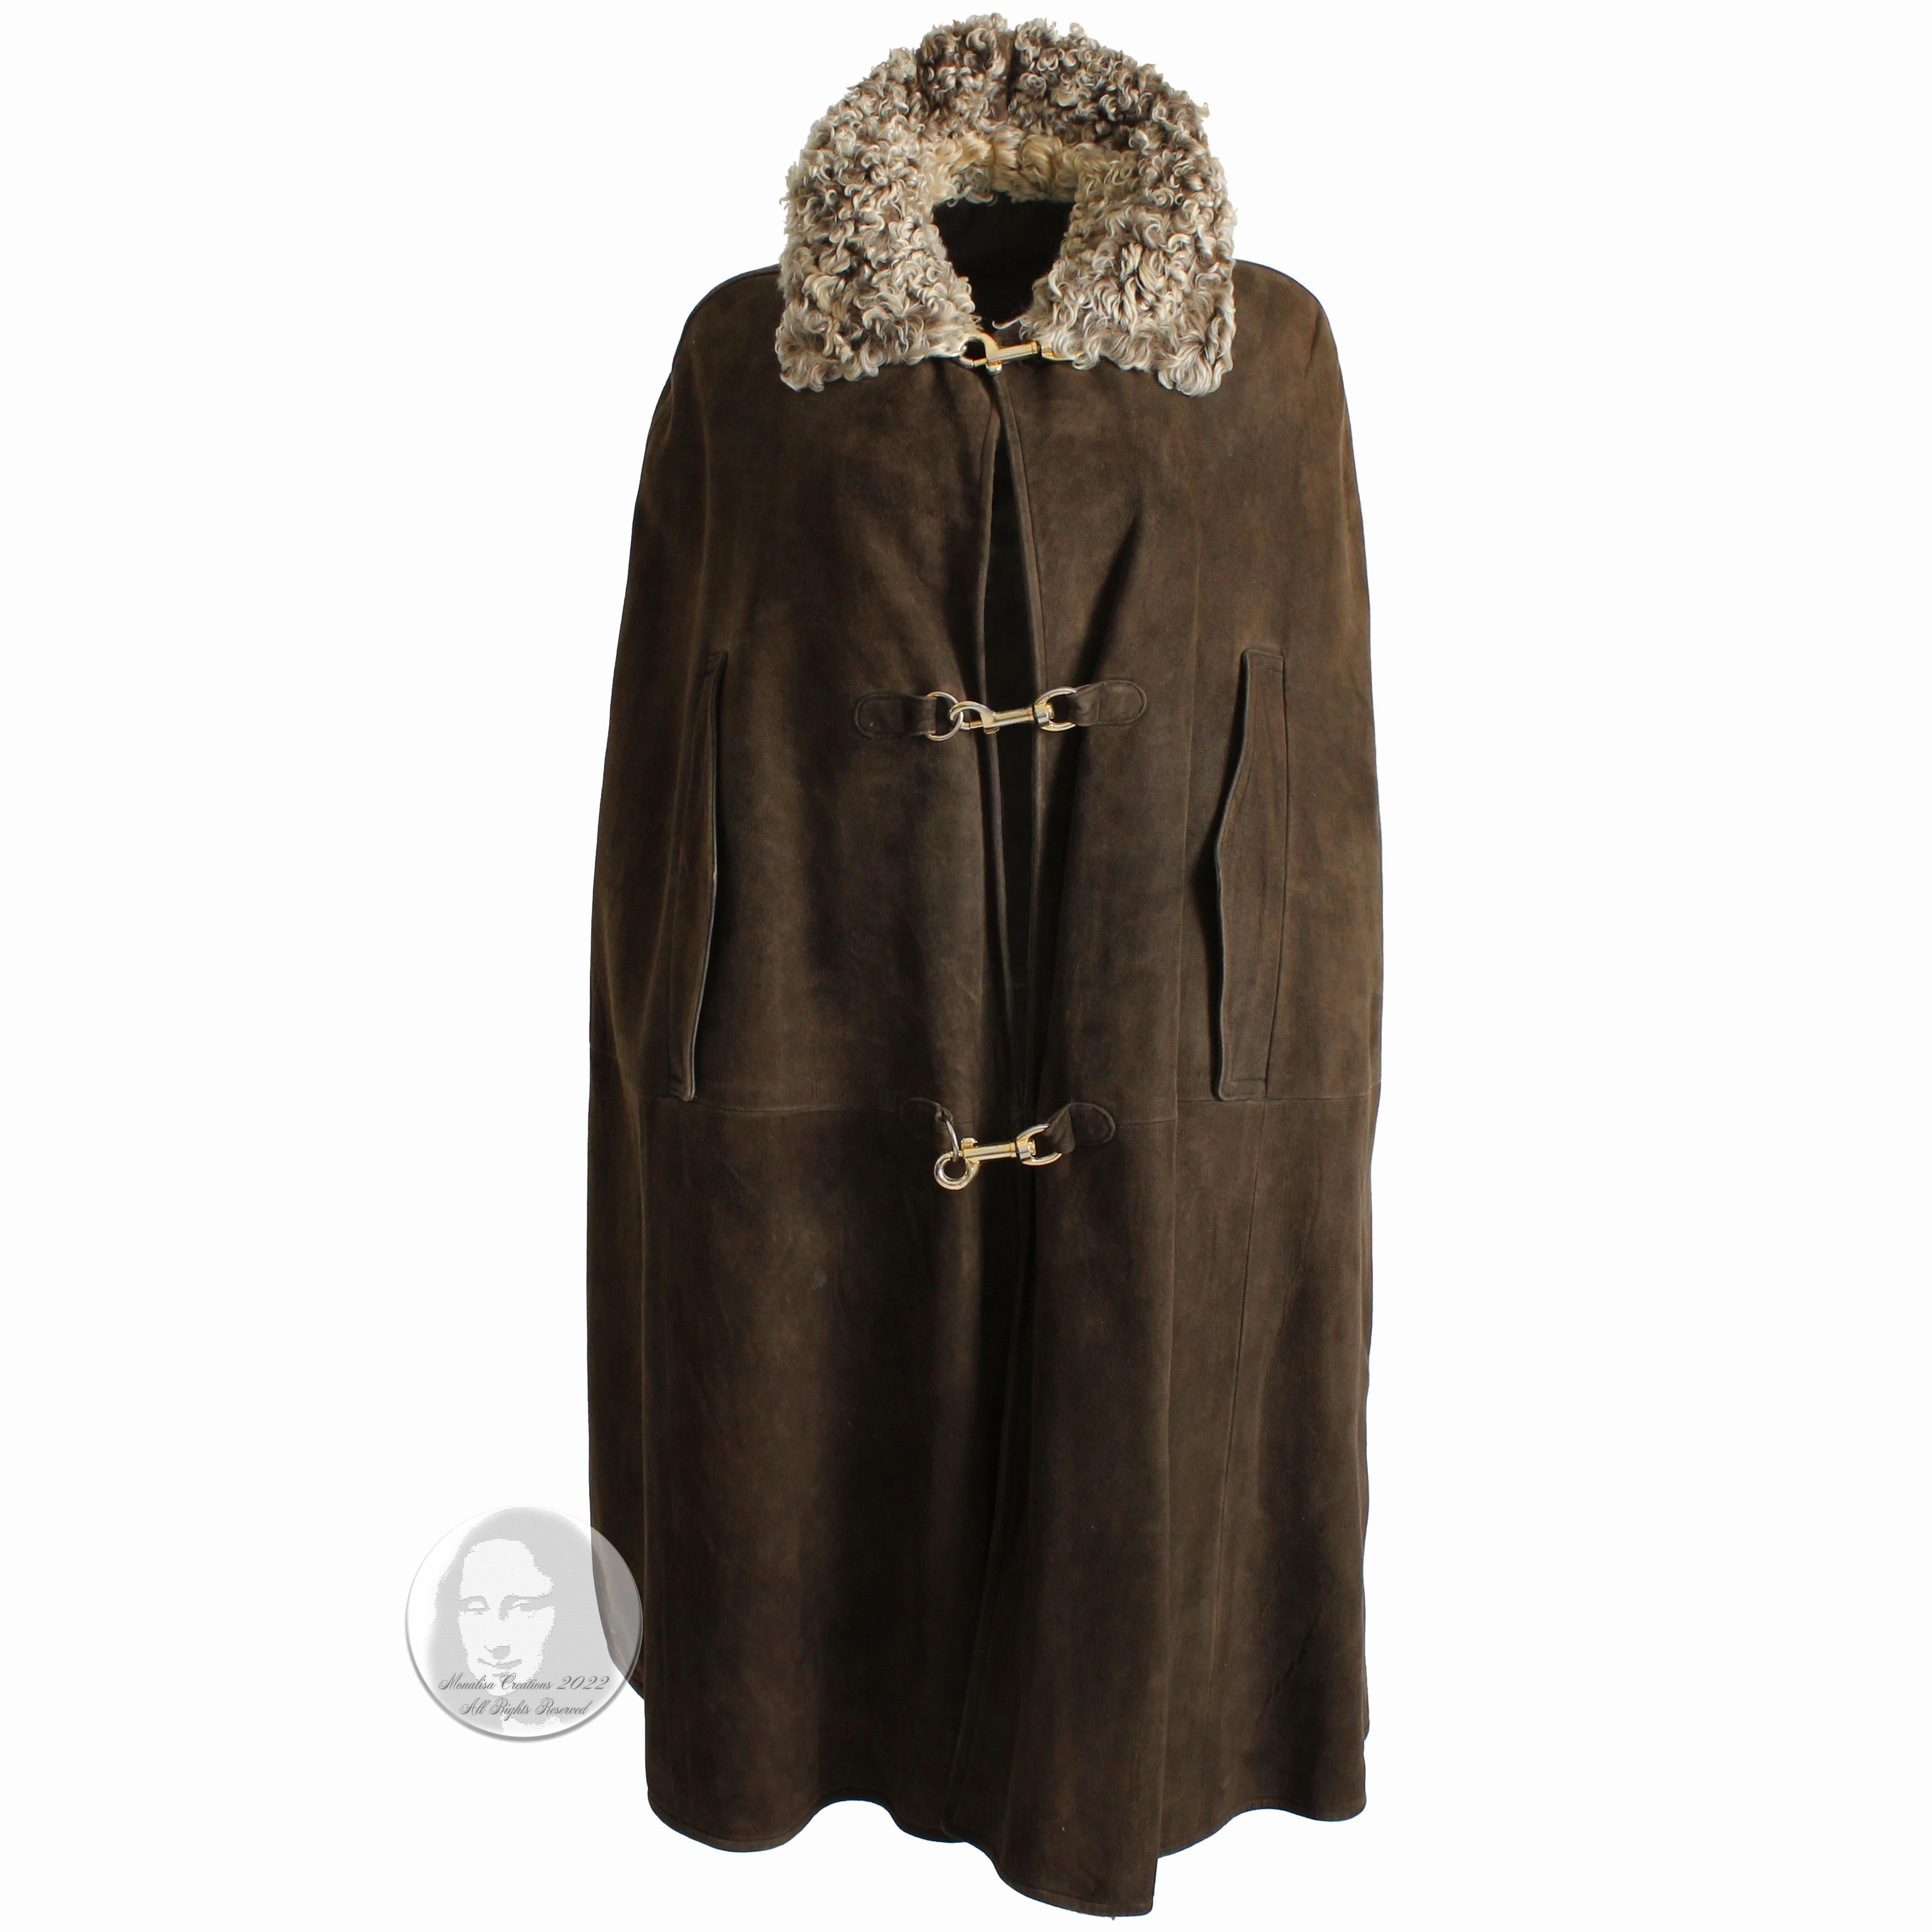 This incredible long cape was designed by Bonnie Cashin, likely in the early 1970s. Made from a substantial brown suede leather, it's lined in matching brown wool jersey fabric.  It fastens with three brass dog leash fasteners, a signature hallmark